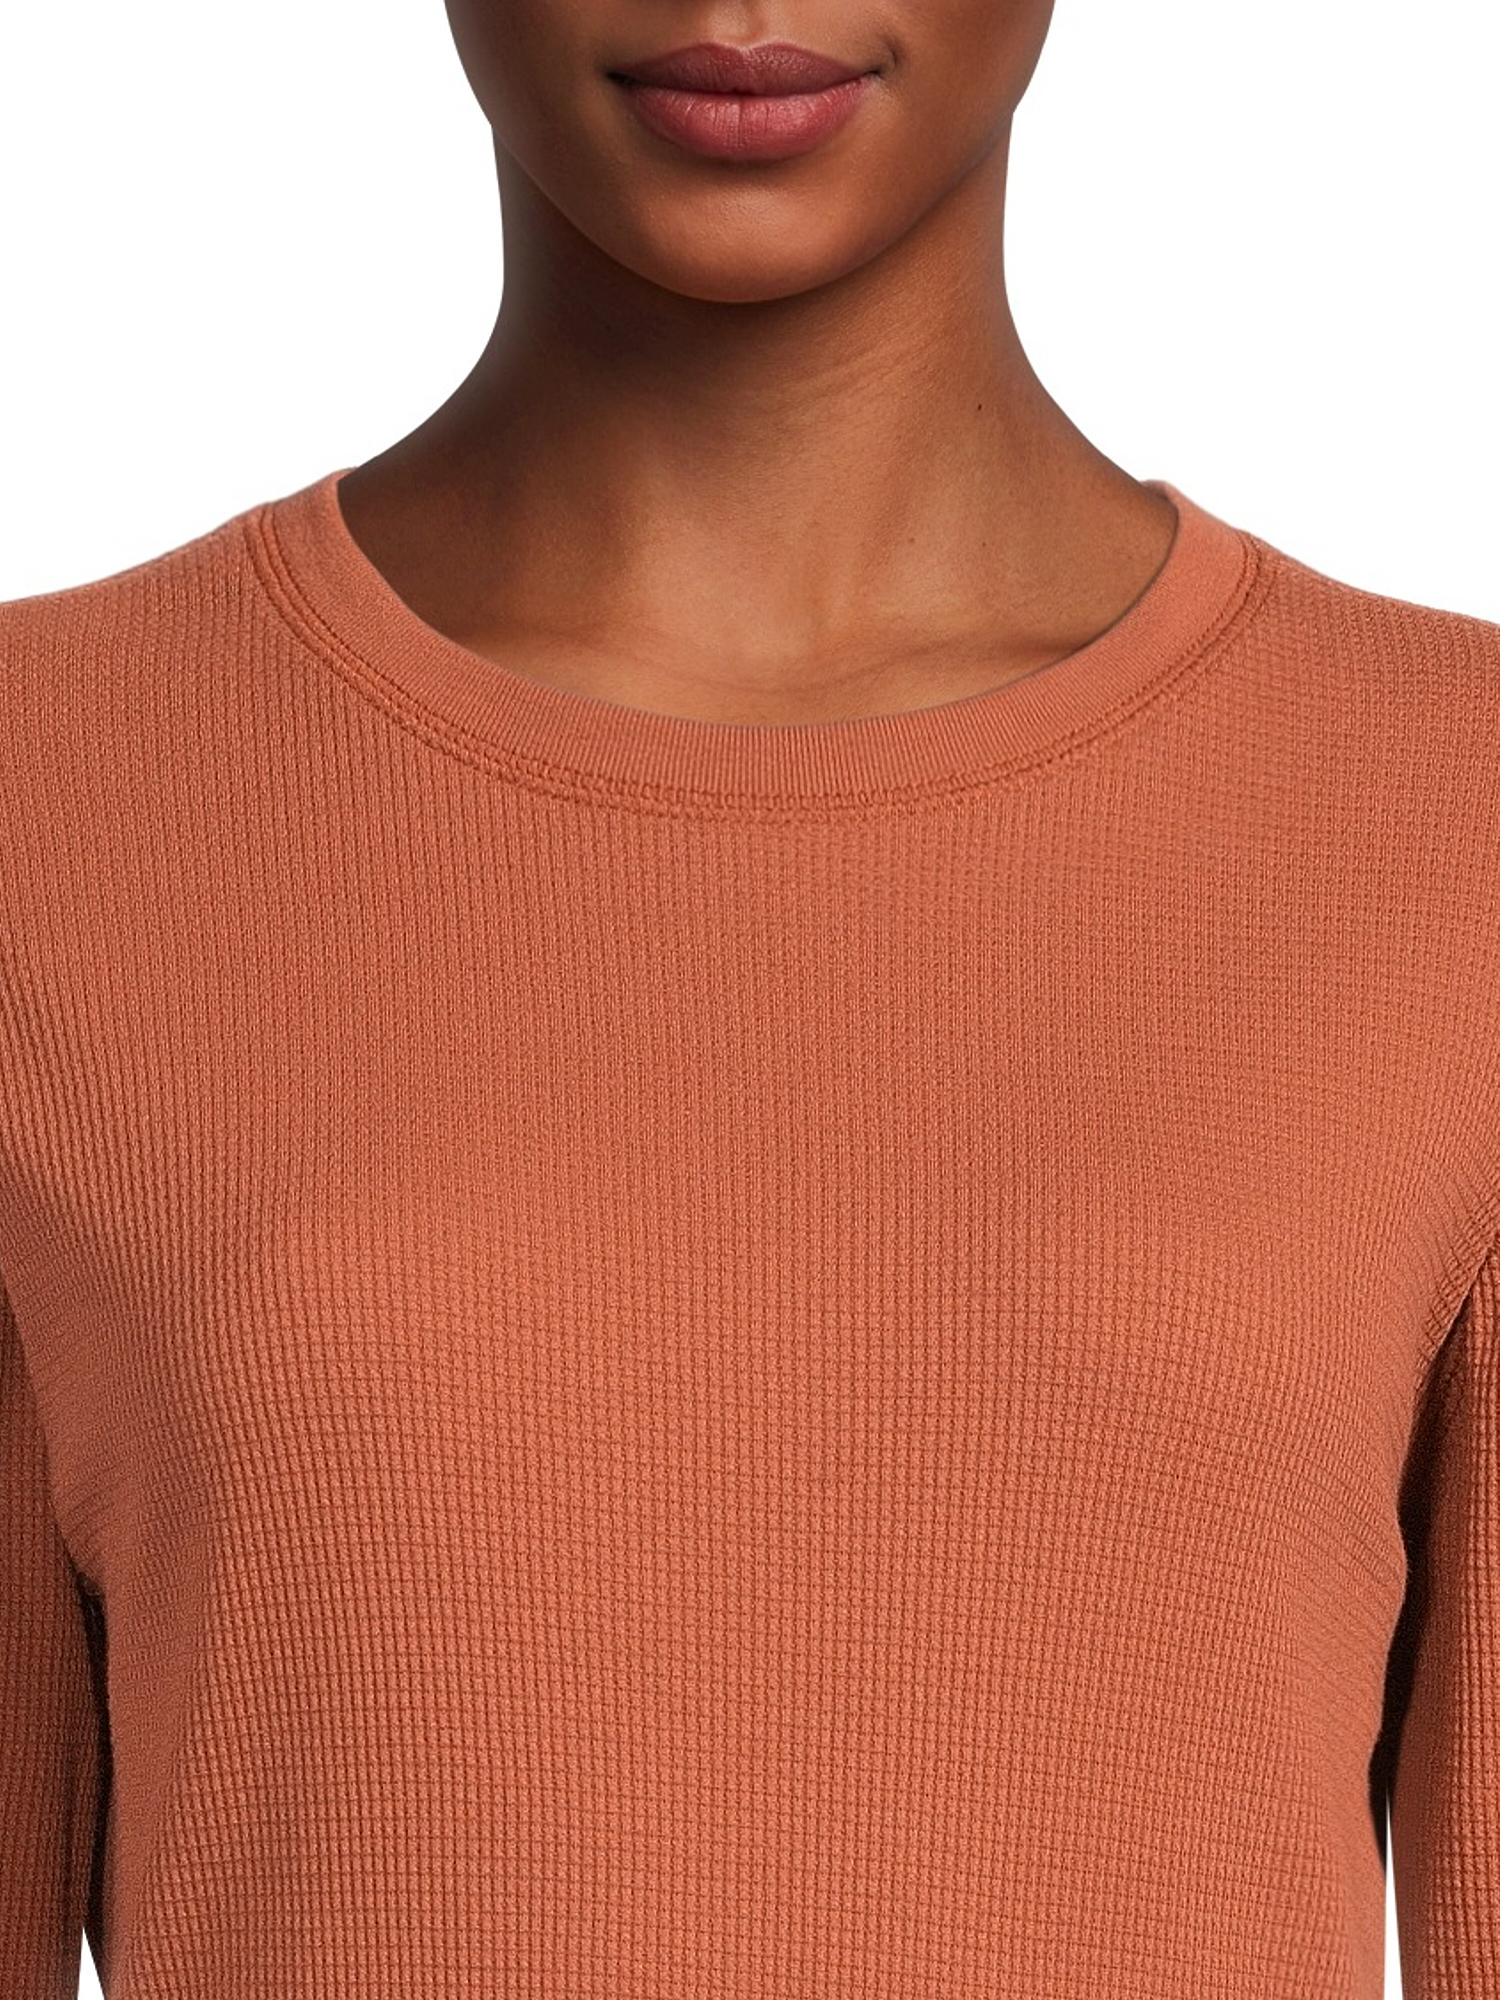 Time and Tru Women's Thermal Top with Long Sleeves - image 5 of 5